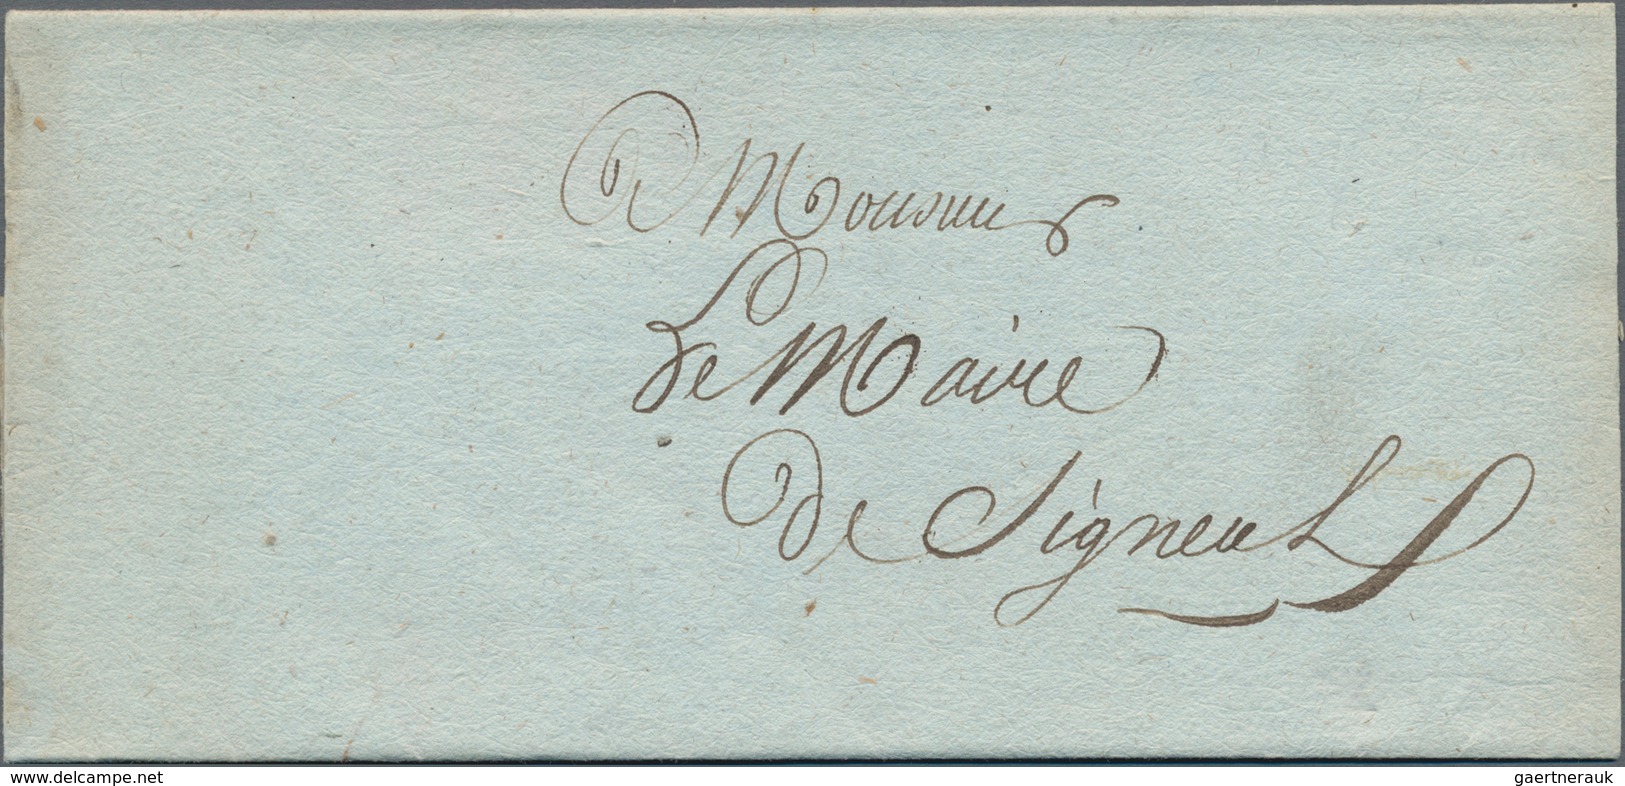 Frankreich - Vorphilatelie: 1821/22 5 folded letters from a correspondence of Neuf Château (Vosges),